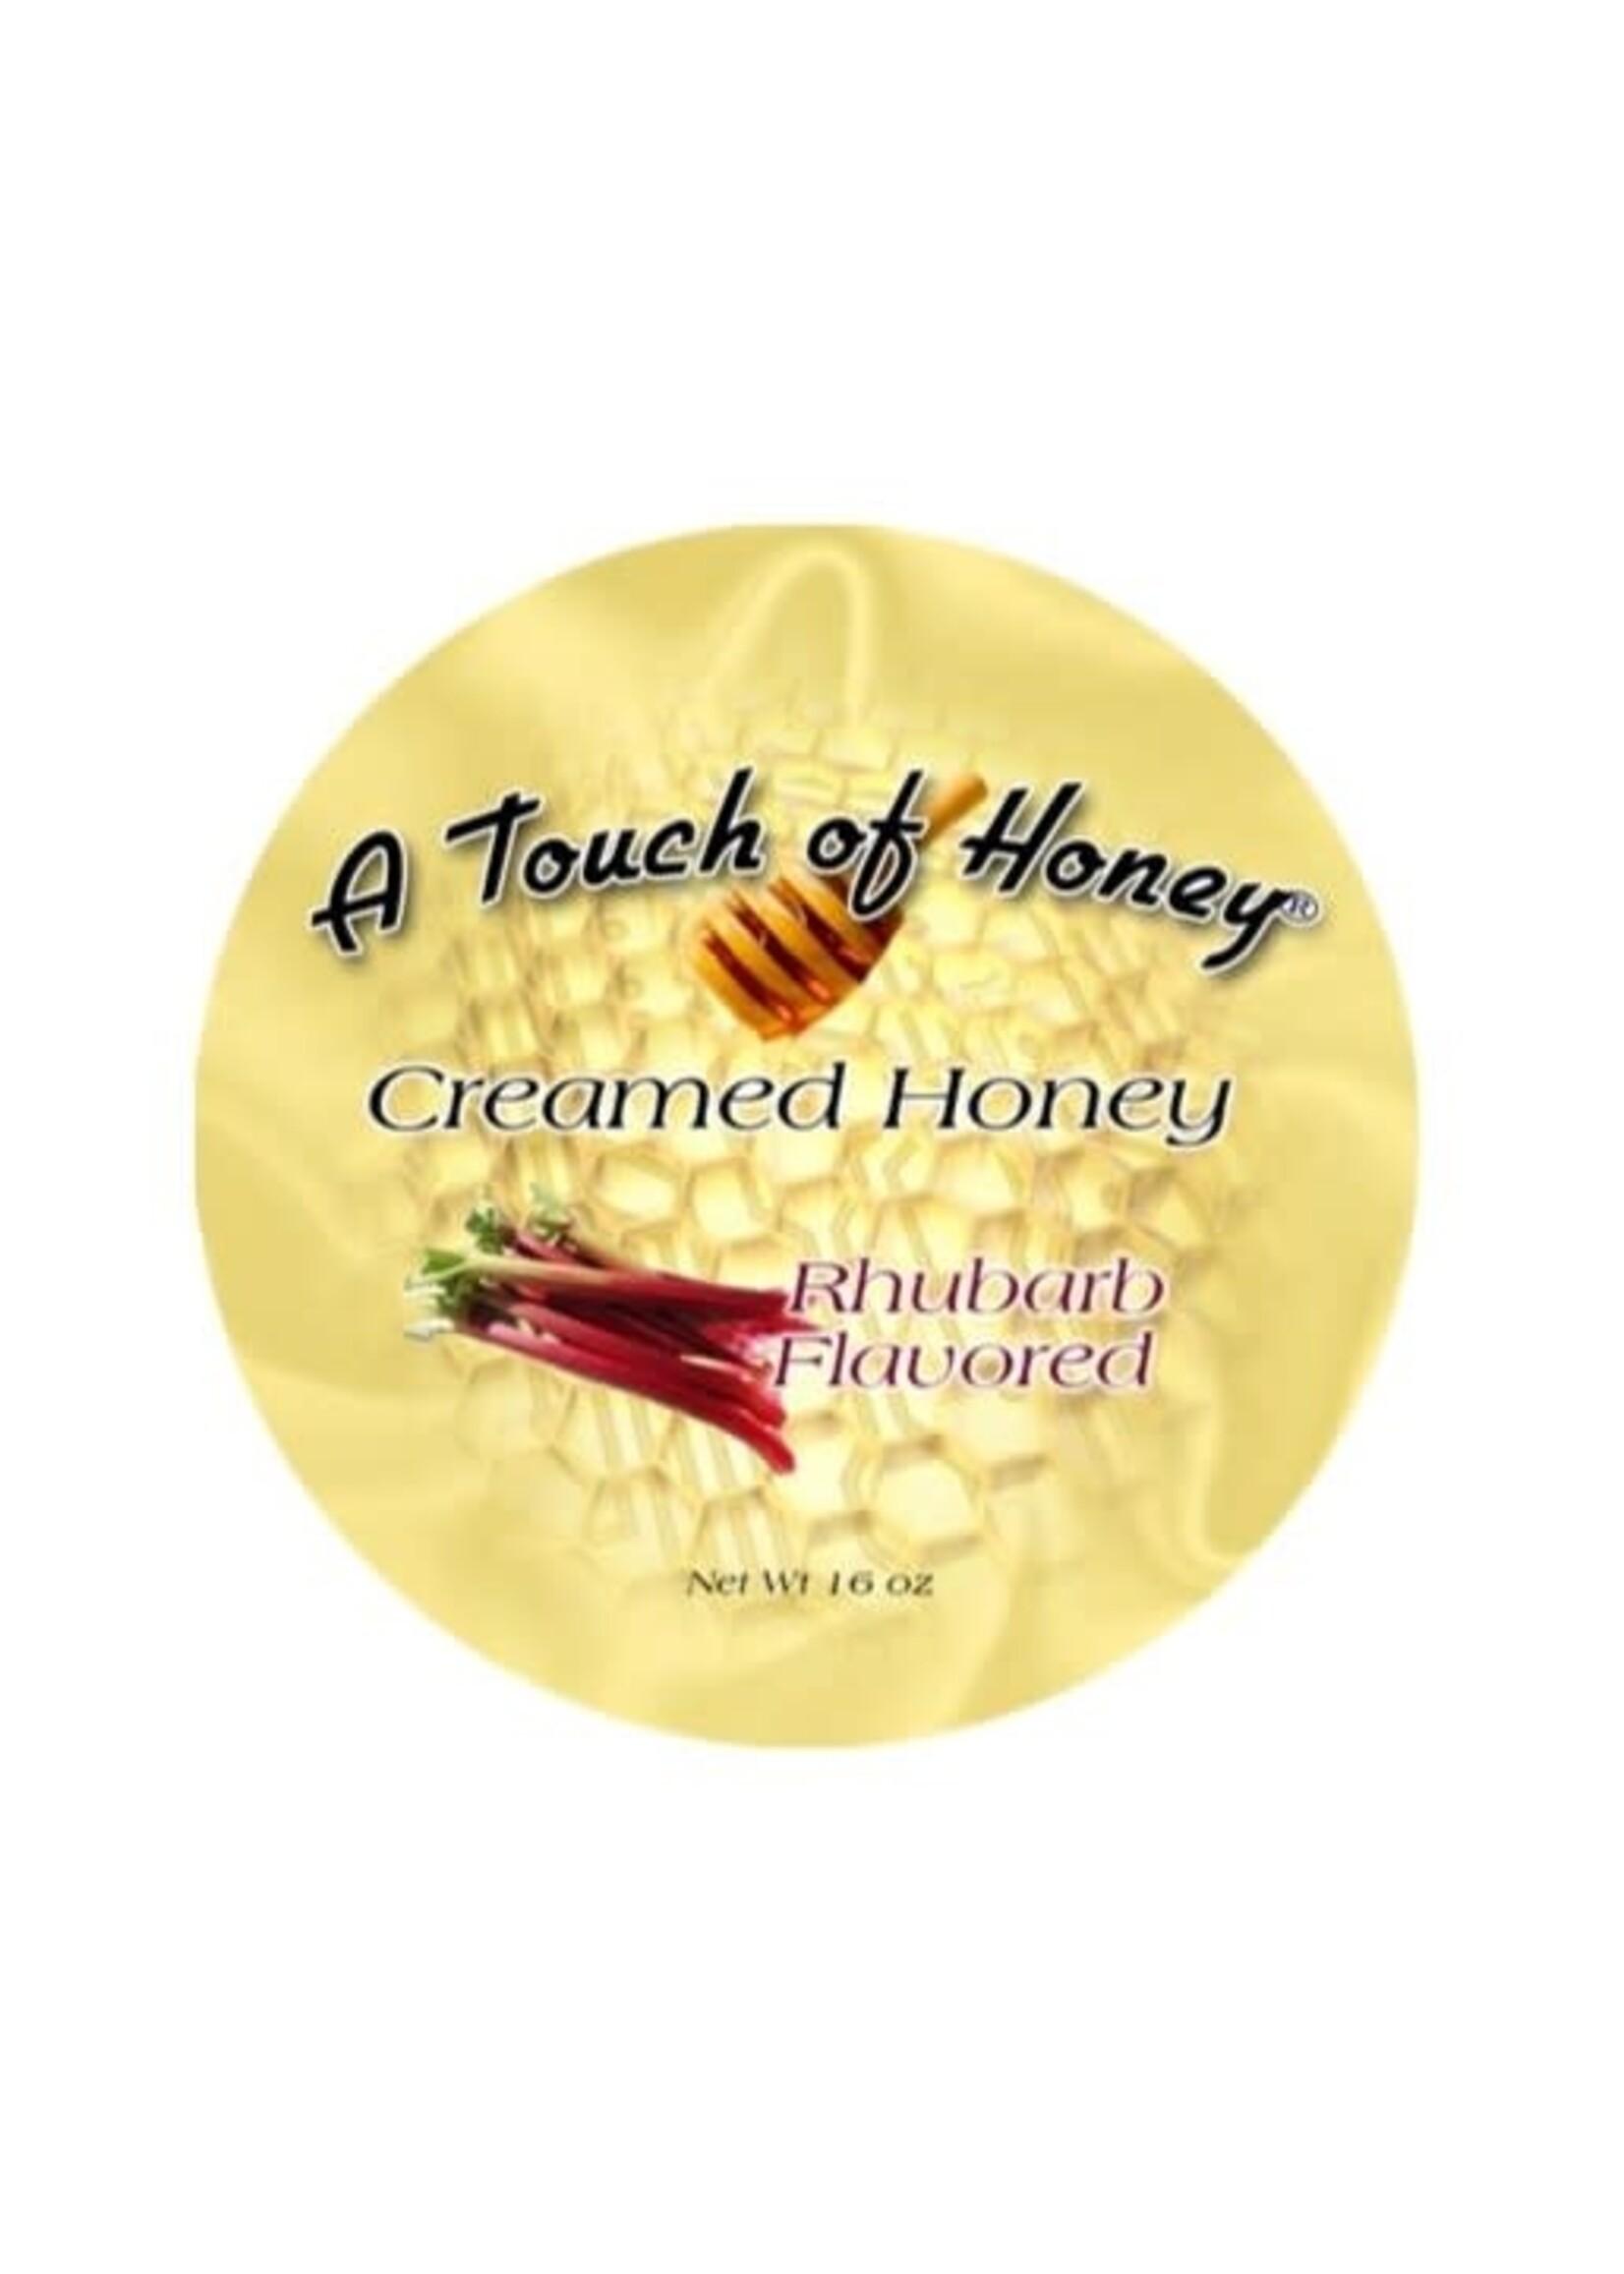 A Touch of Honey Rhubarb Flavored Creamed Honey